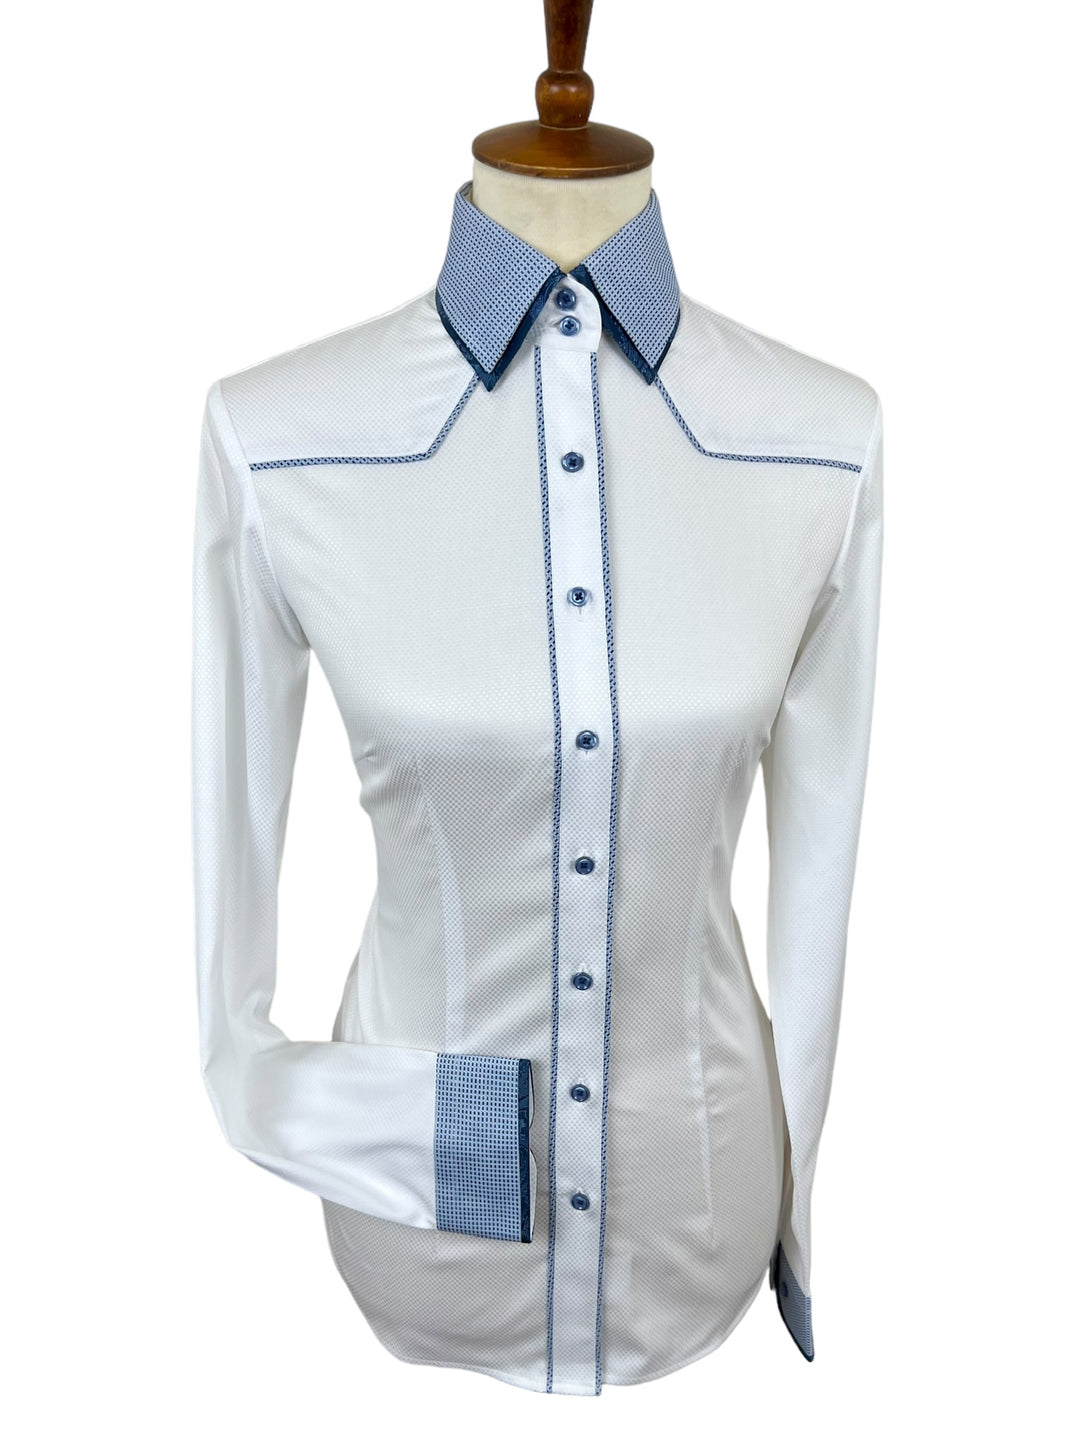 The Trudy Western Shirt